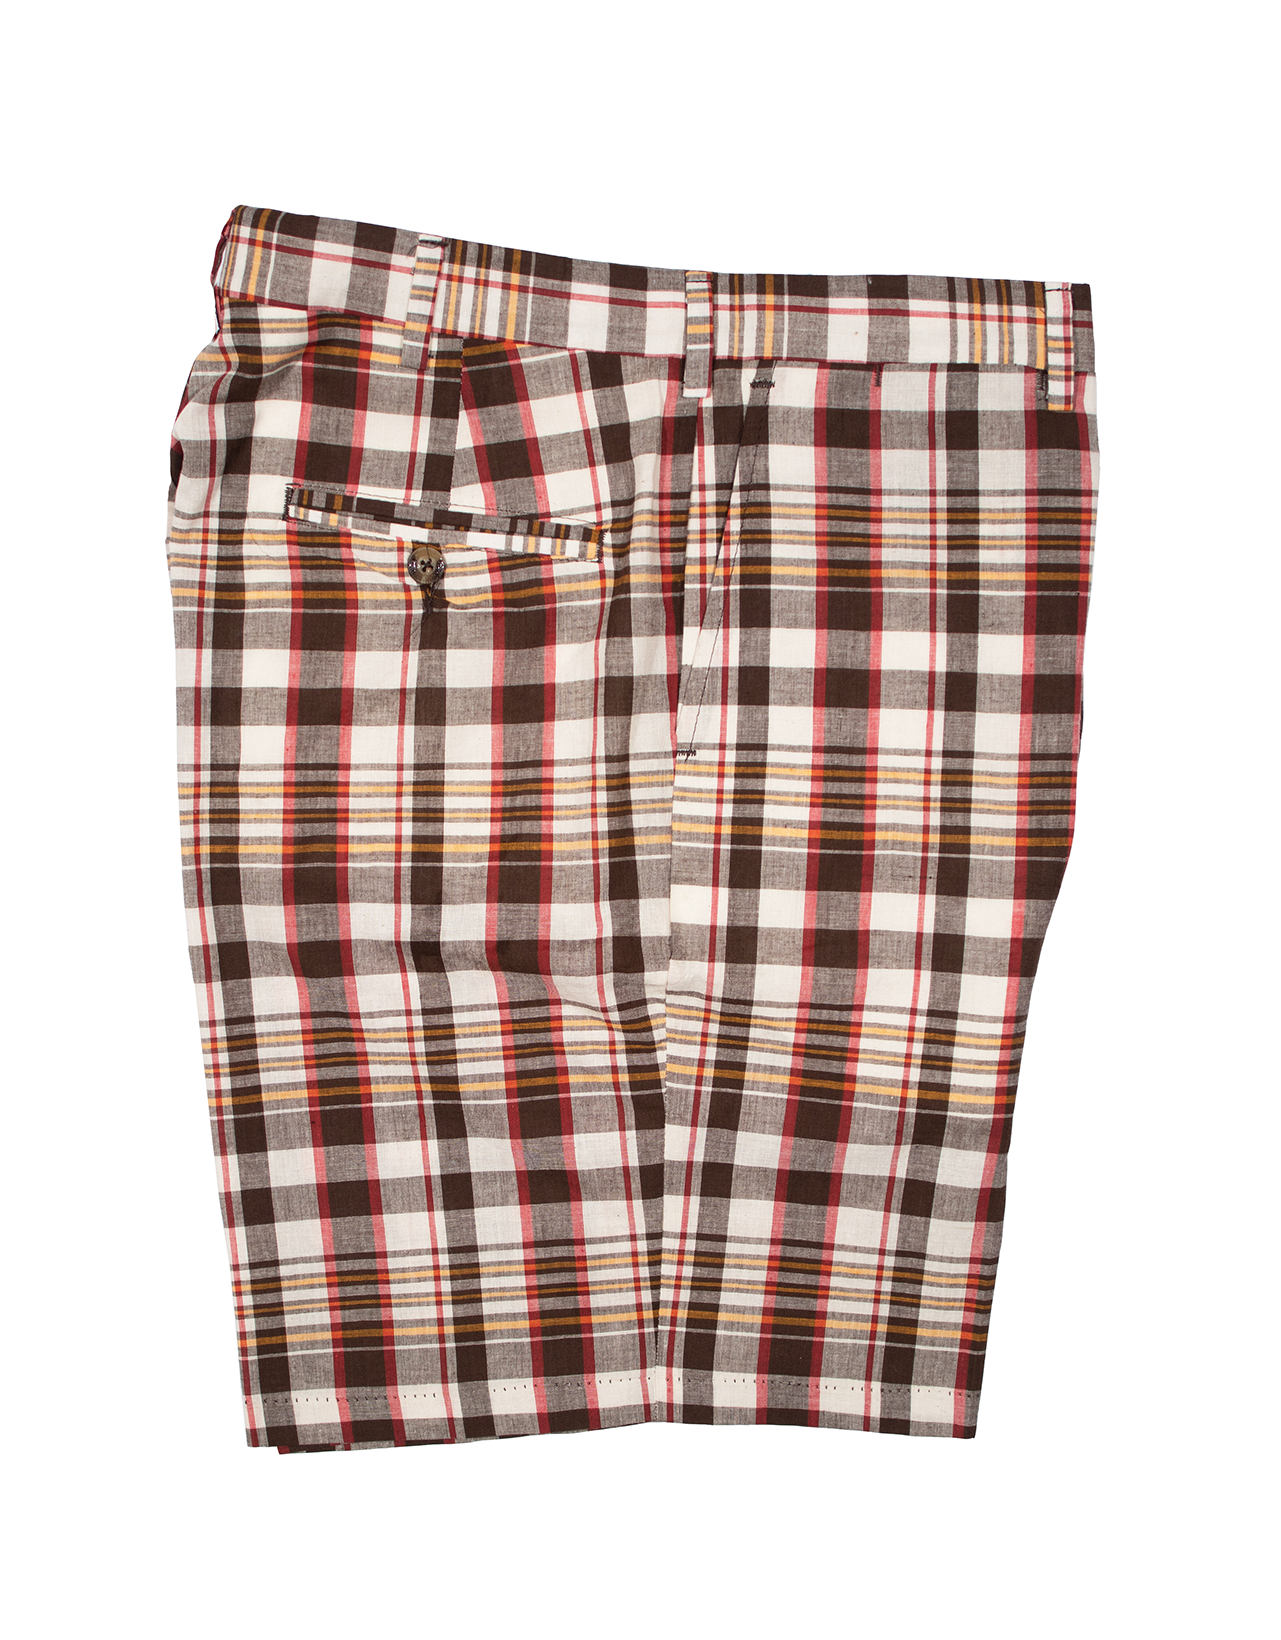 BROWN CREAM RED GOLD MADRAS SHORTS - CLASSIC FIT